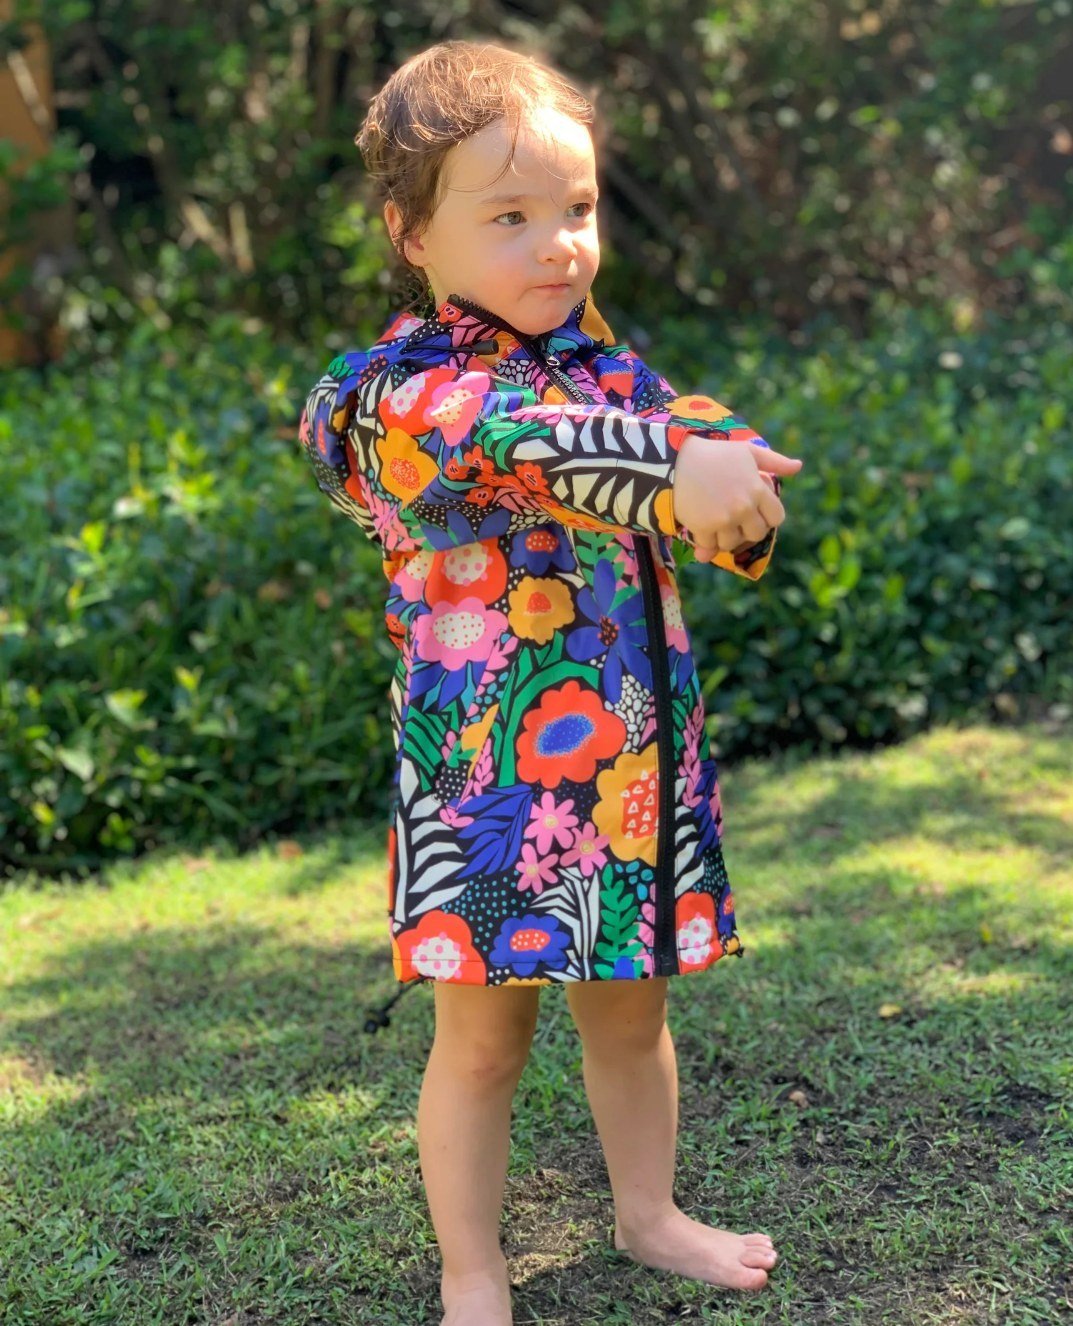 Excited to share that my bold floral collage print has made its way onto various products since I created it. 🌺✨ Check out the newest addition: @monsterthreads just released it on their latest raincoat range for kids and adults alike! 🌈☔️